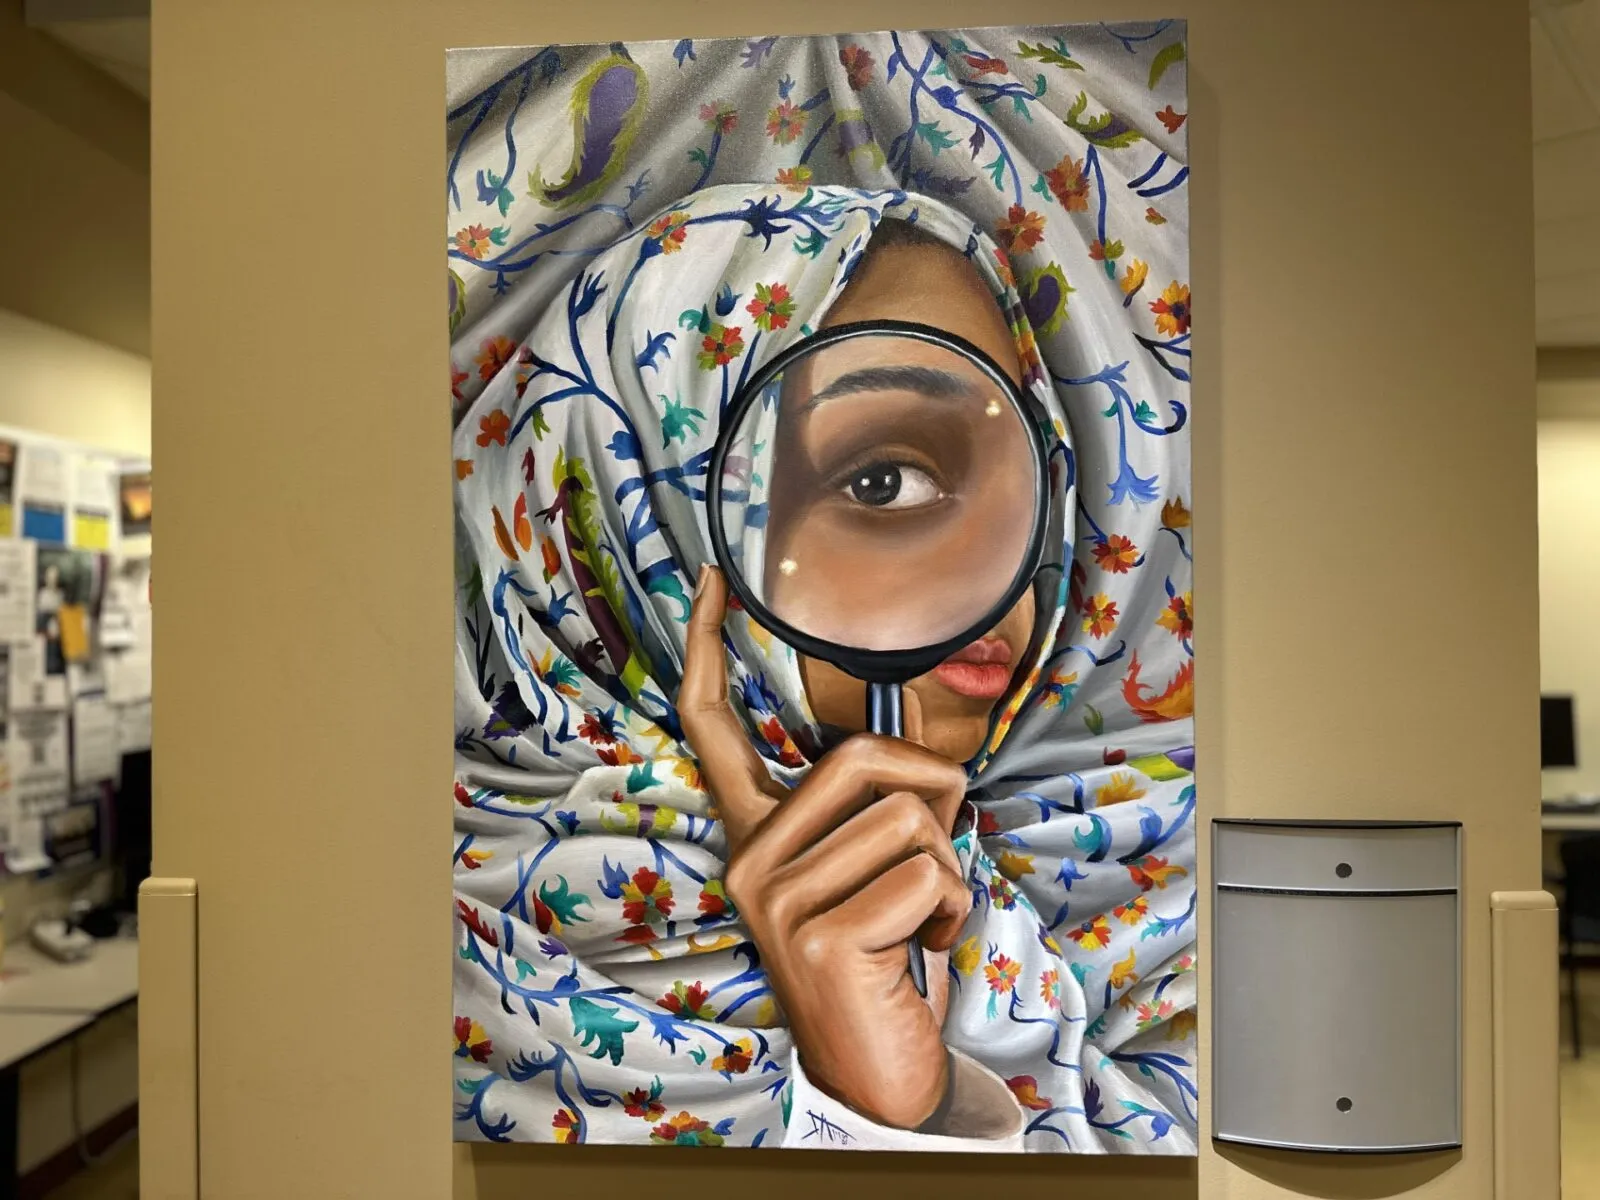 a vertical painting hangs on a tan wall; it features an upclose woman wearing a floral hijab holding a magnifying glass up to her eye